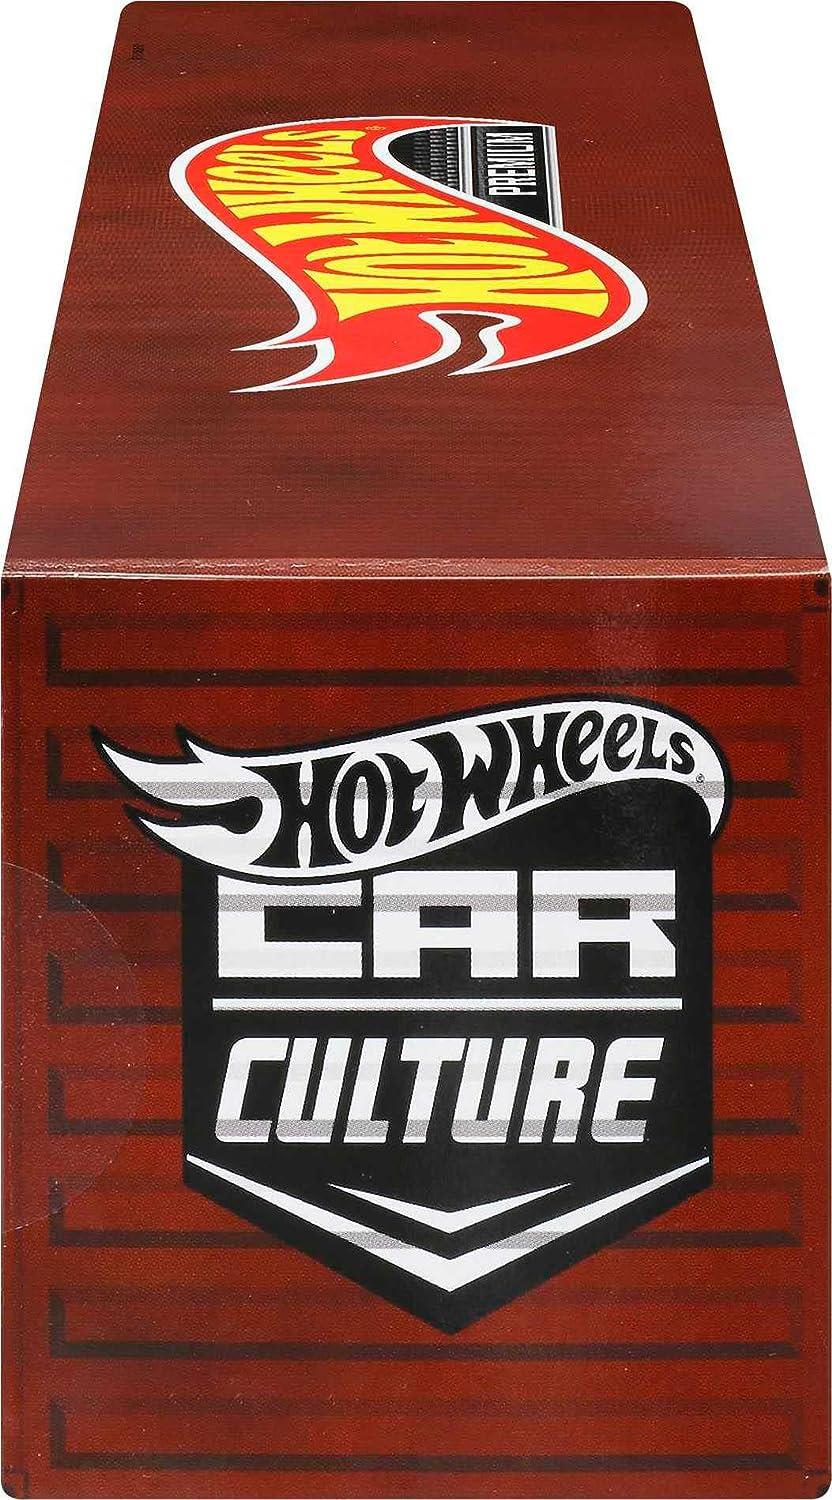 Hot Wheels Lions Roar Container Set 5ct Cars Classic Drag Racing Metal Collectible Mattel